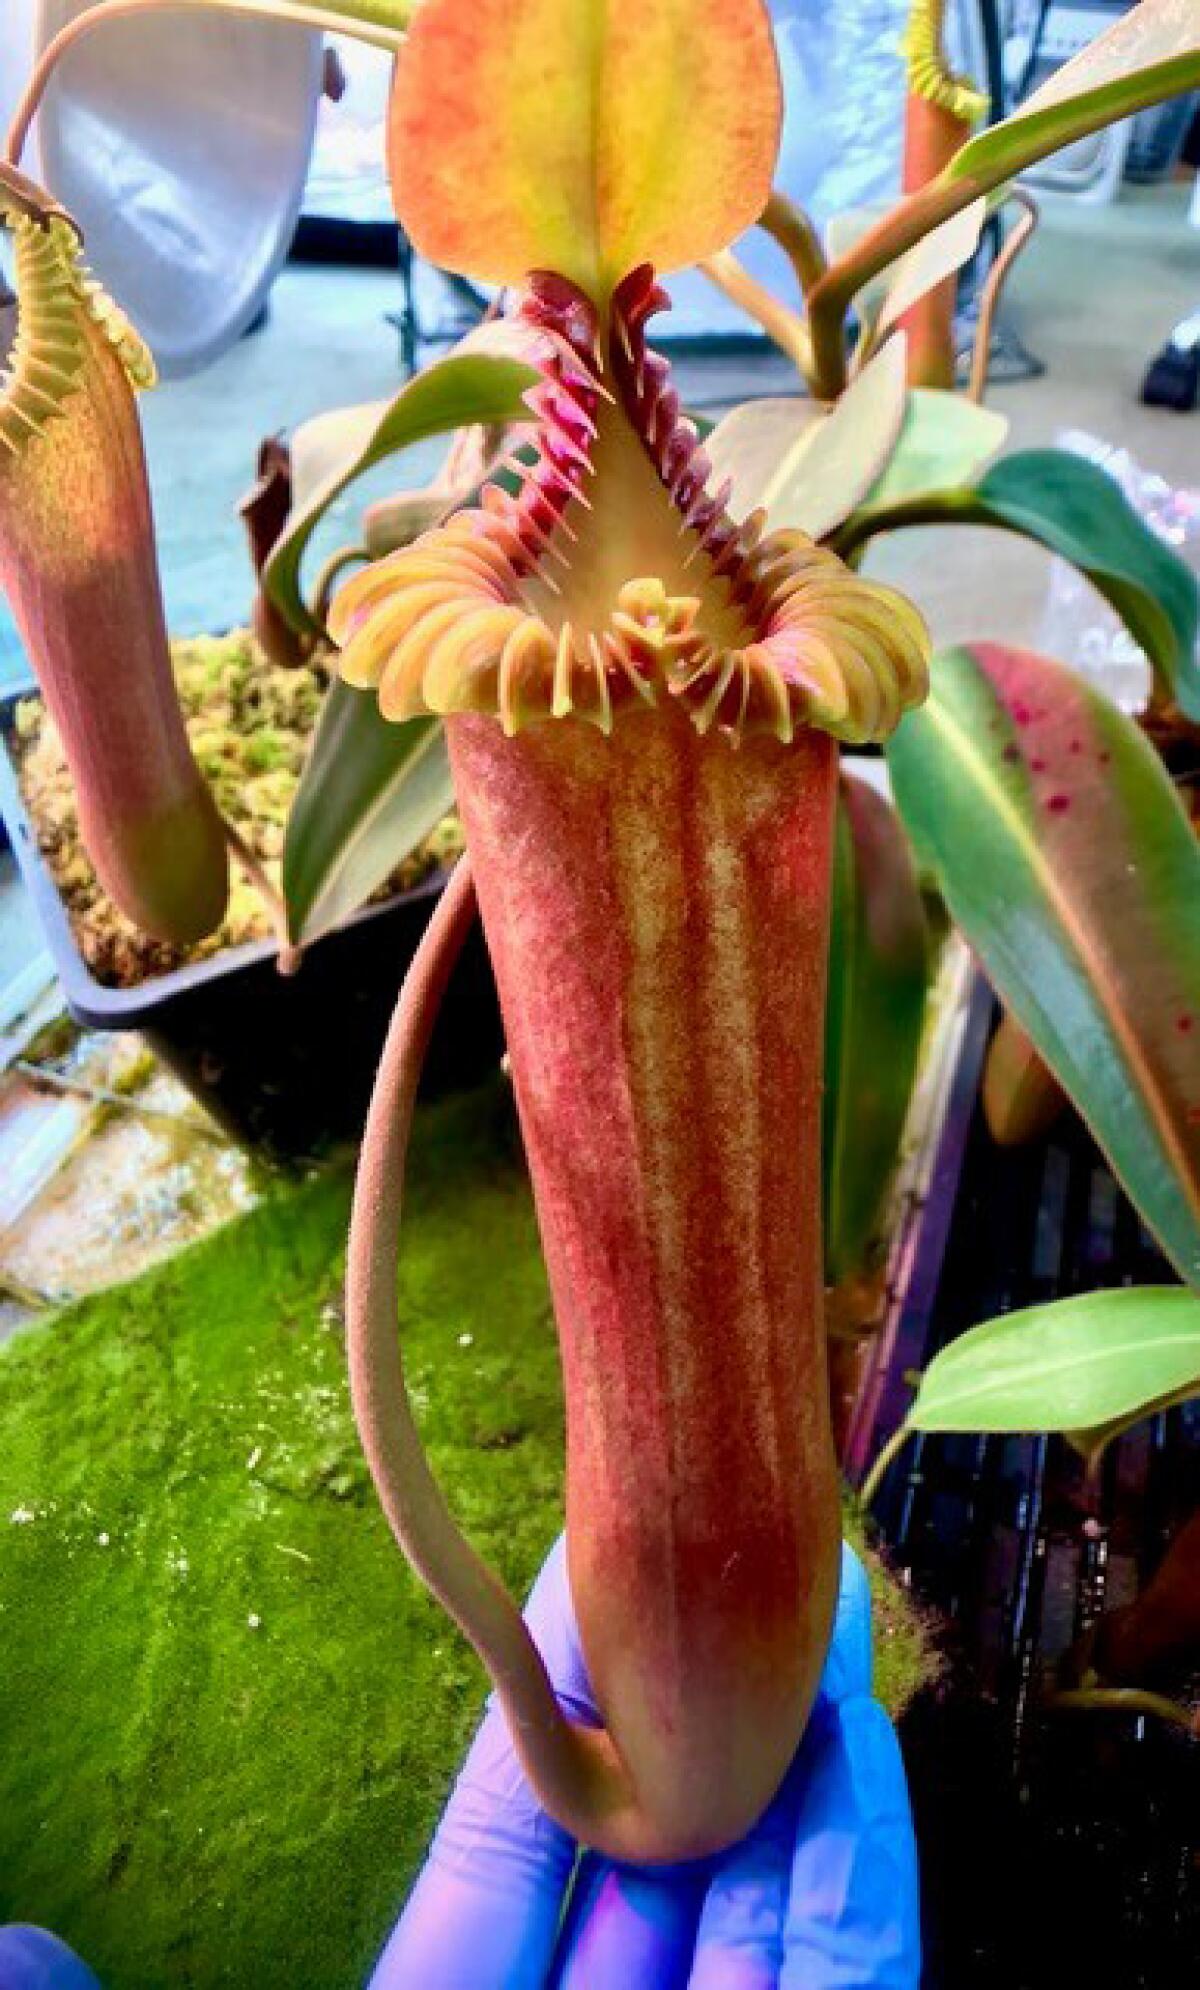 The Asian pitcher plant (Nepenthes Edwardsiana) is native to parts of South East Asia, India, Madagascar and Australia.